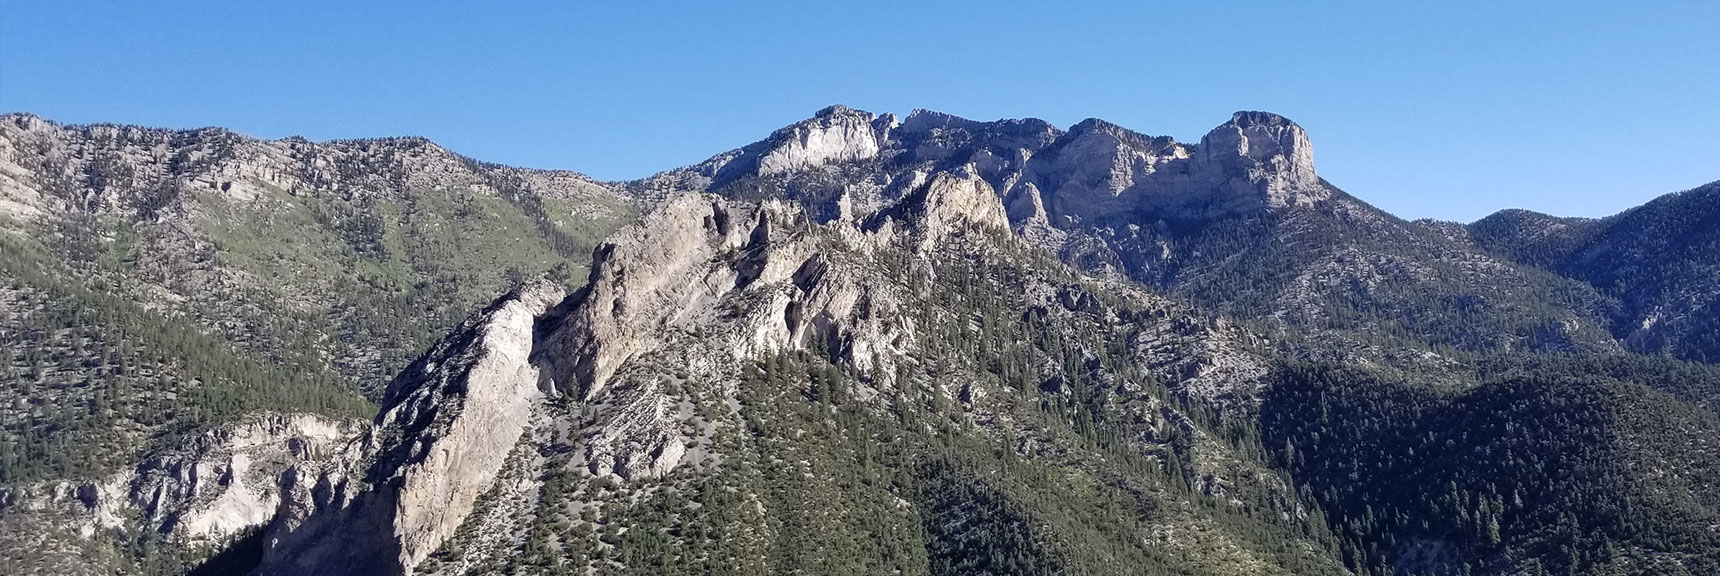 Cockscomb Peak and Ridge Viewed from Cathedral Rock Summit in Mt. Charleston Wilderness, Nevada